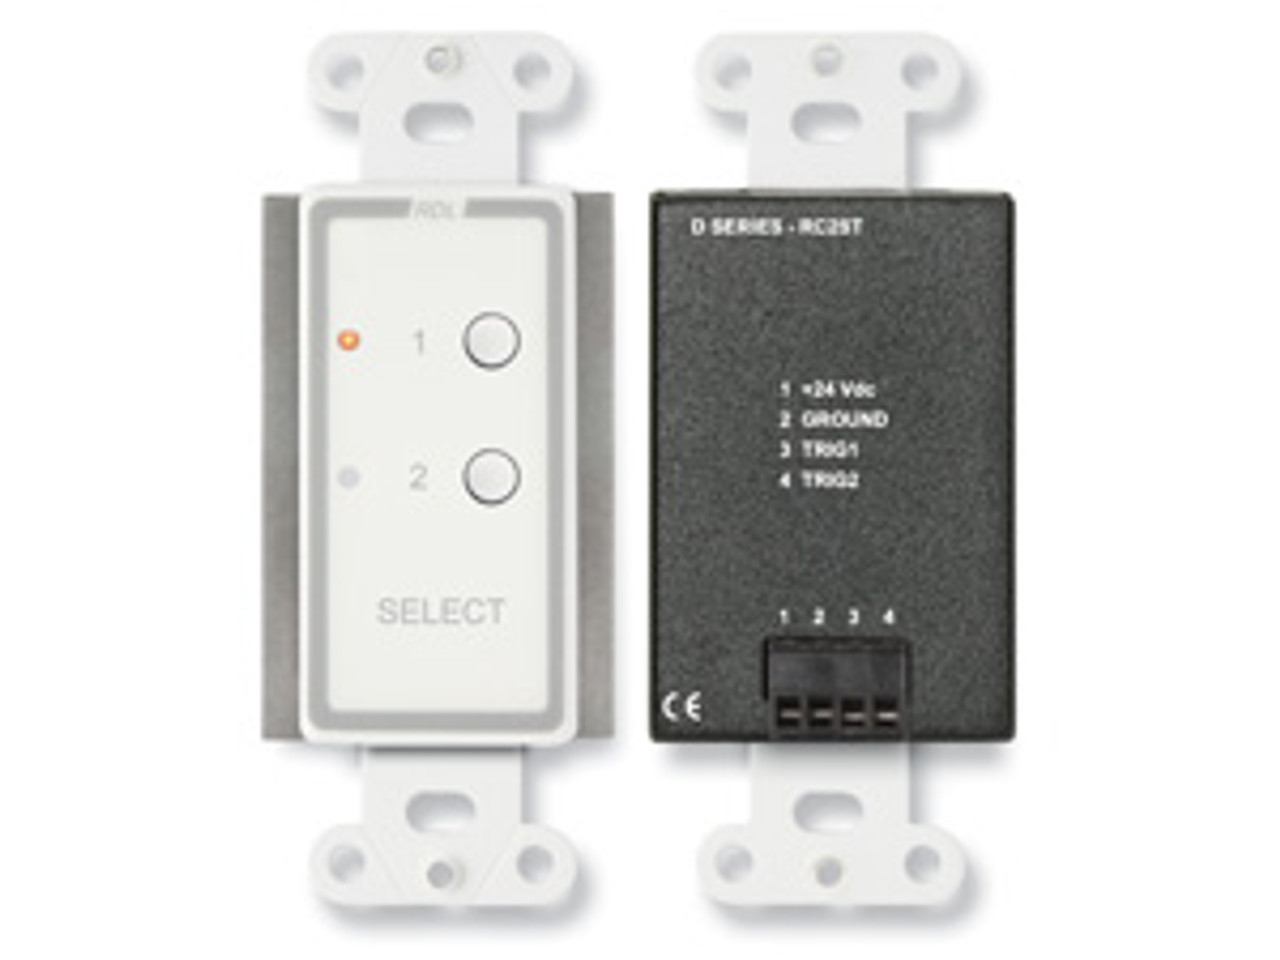 RDL D-RC2ST 2 Channel Remote Control for STICK-ON - Remote Selection of Audio or Video Sources (DRC2ST)